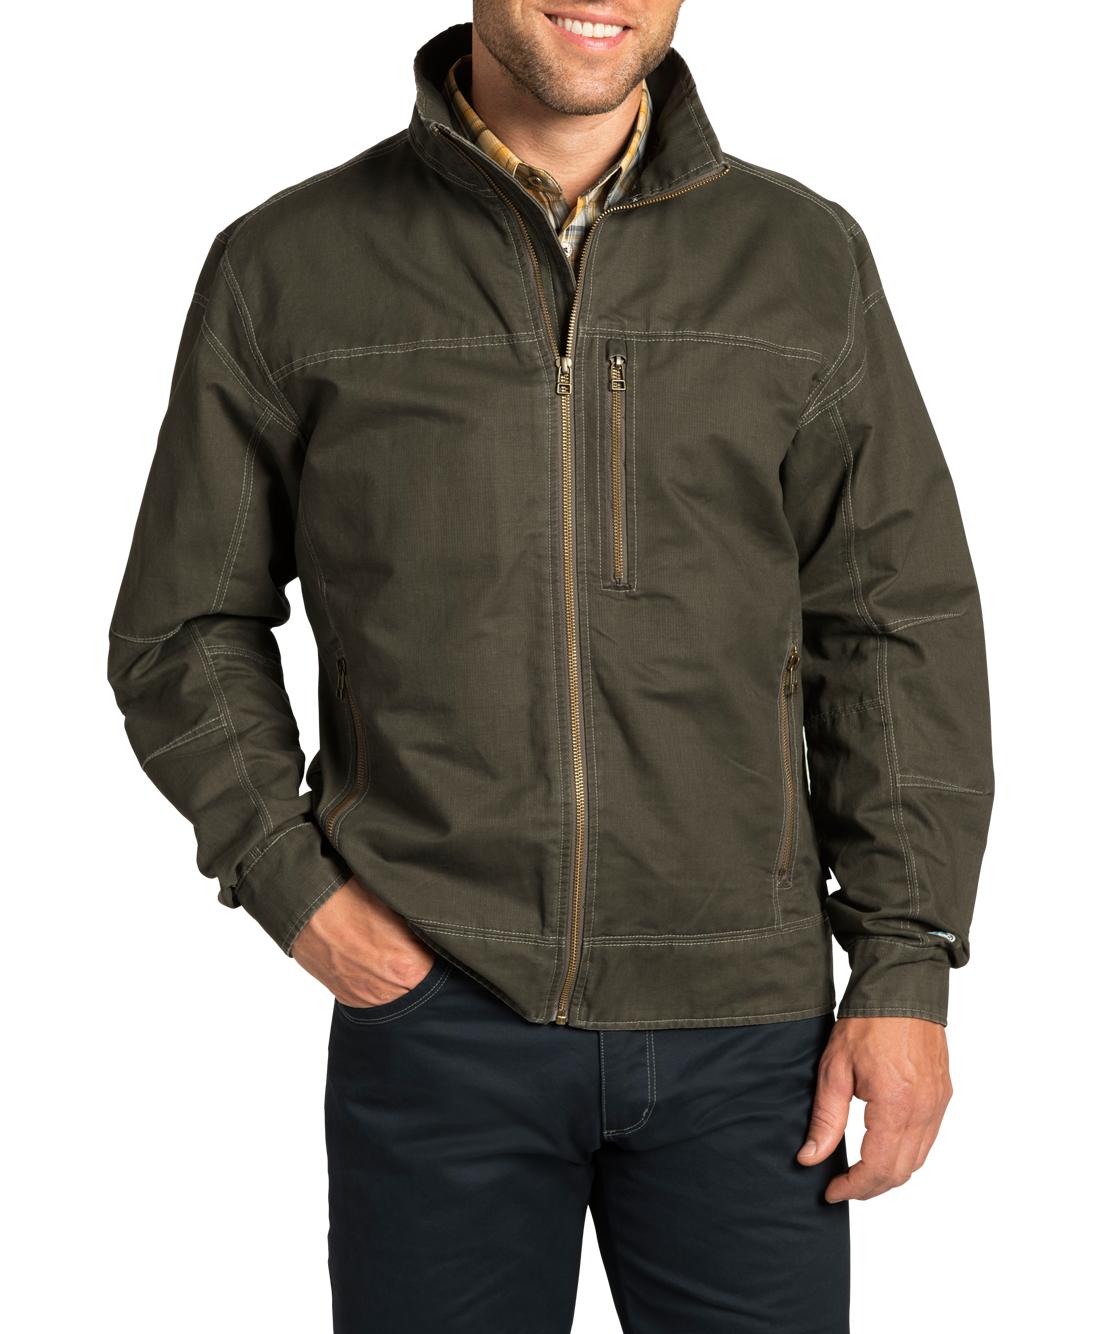 The Flight Jacket by Kühl [Review] 